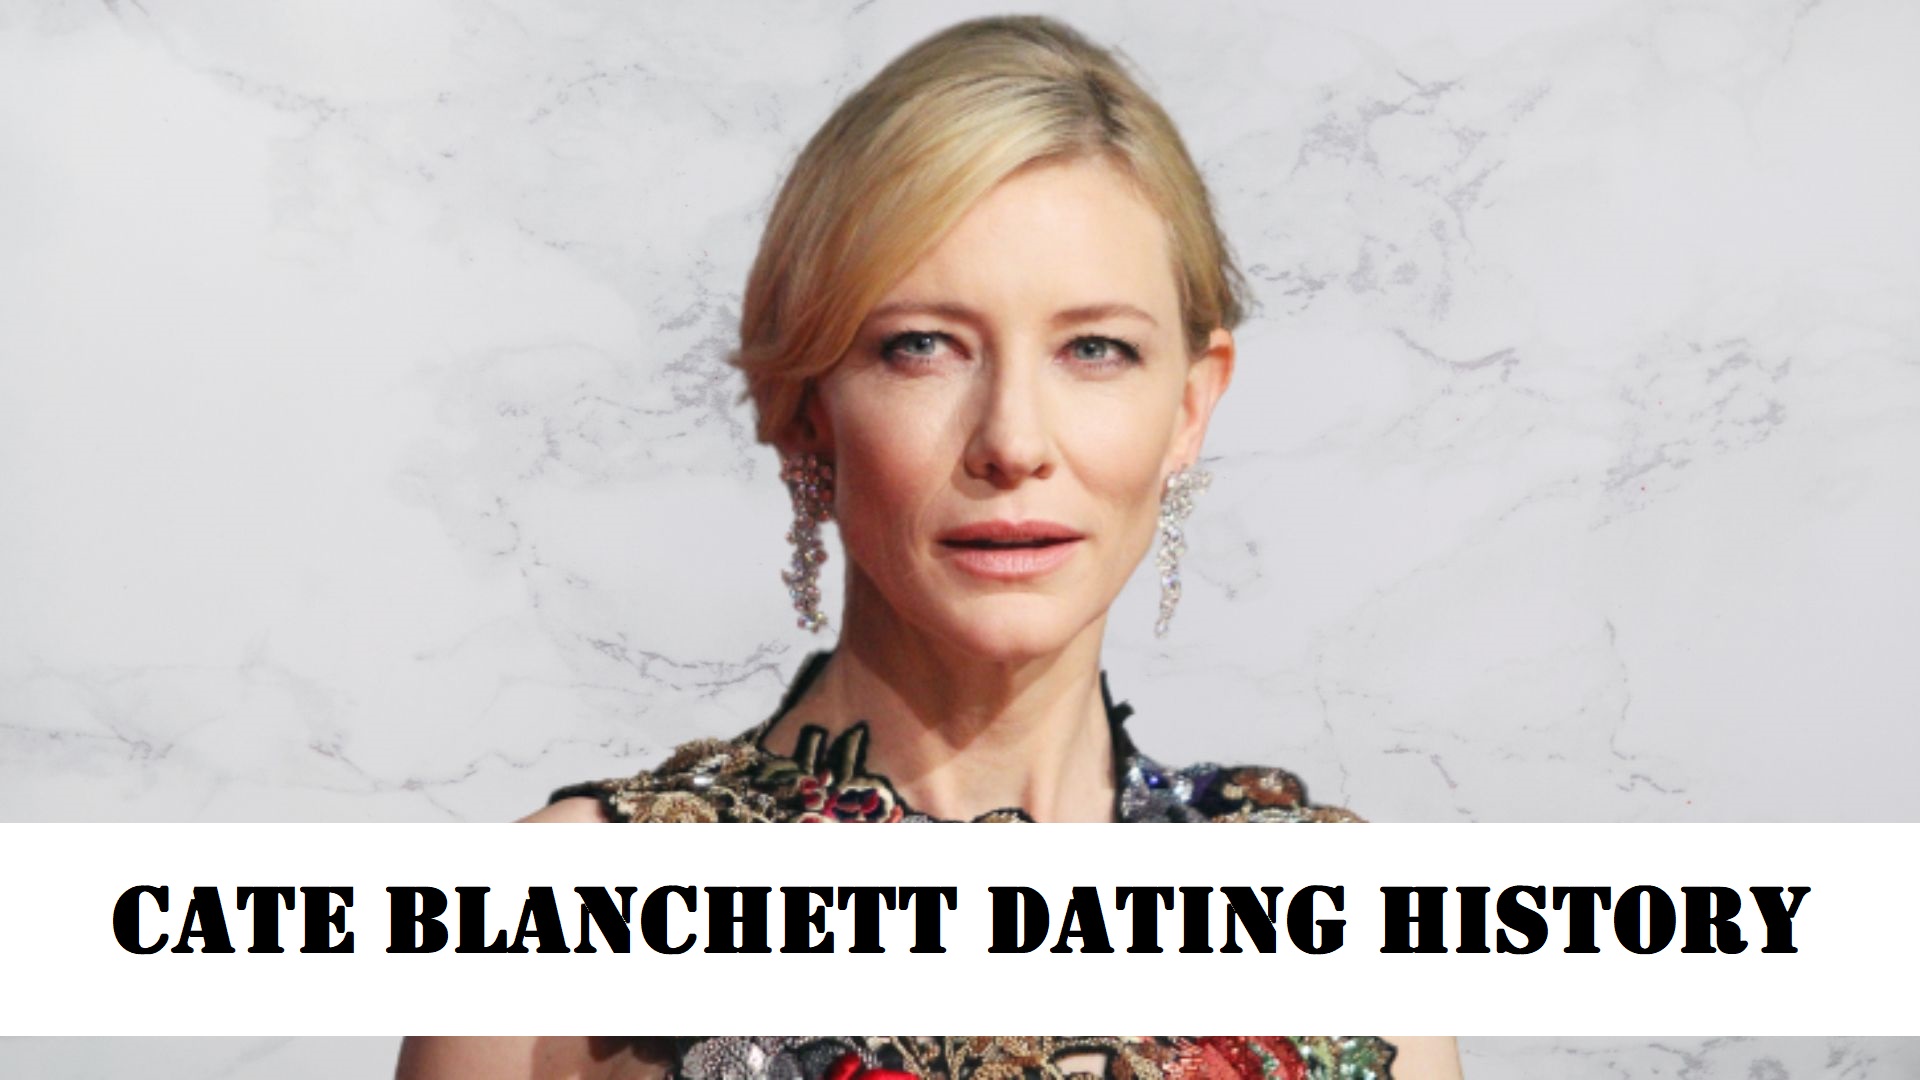 Cate Blanchett Dating History| Everything About Her Love Life! 